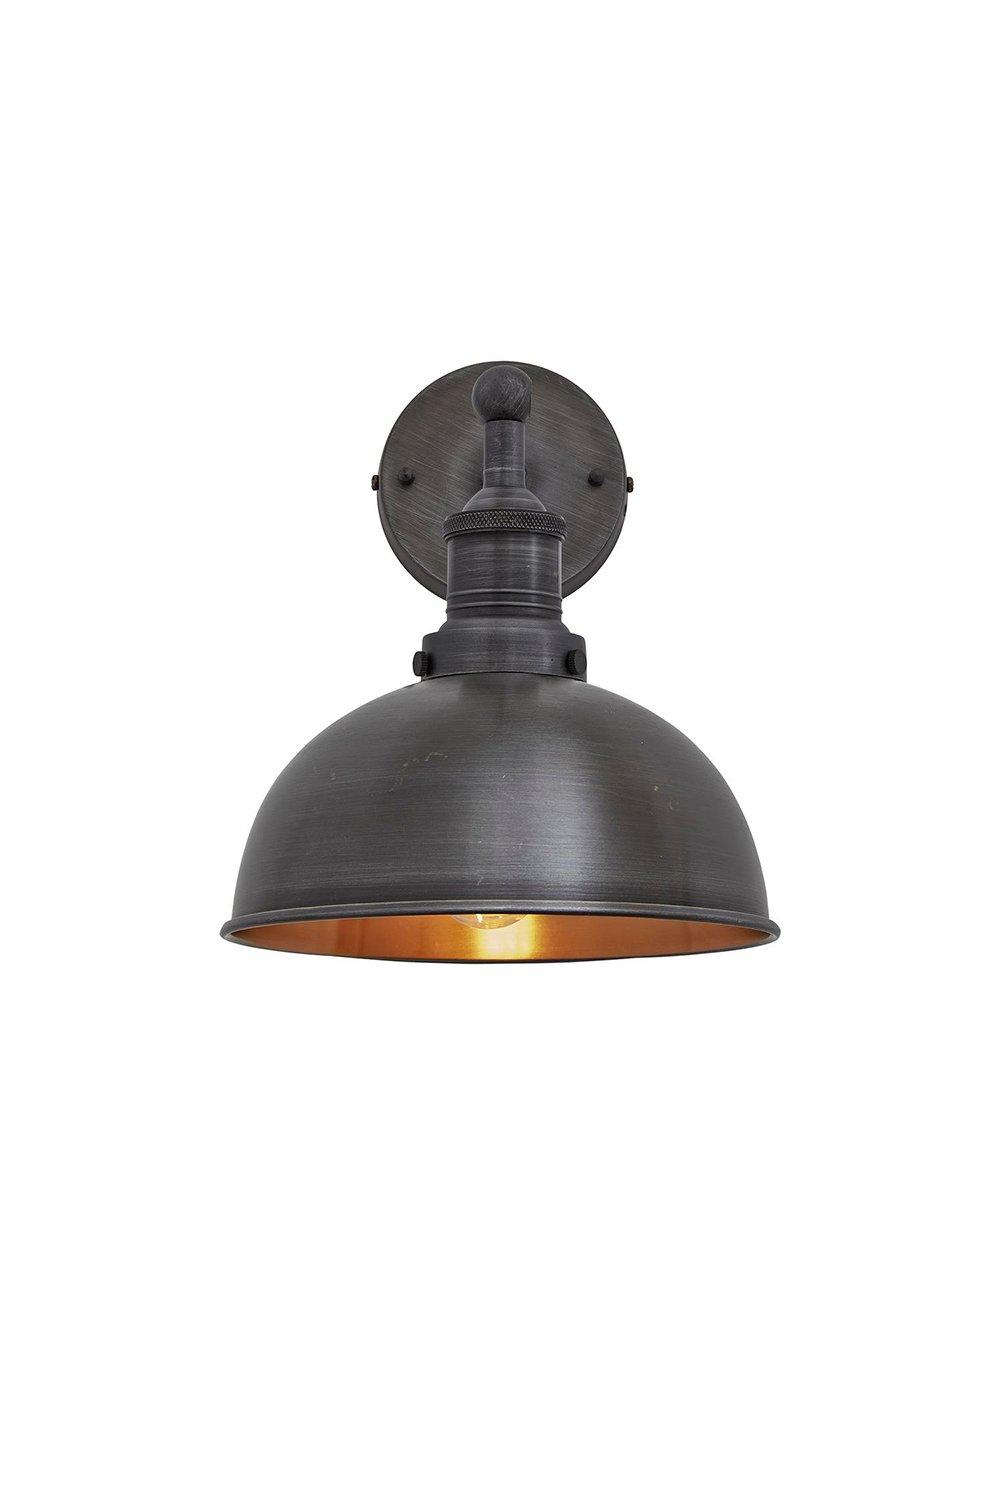 Brooklyn Dome Wall Light, 8 Inch, Pewter & Copper, Pewter Holder